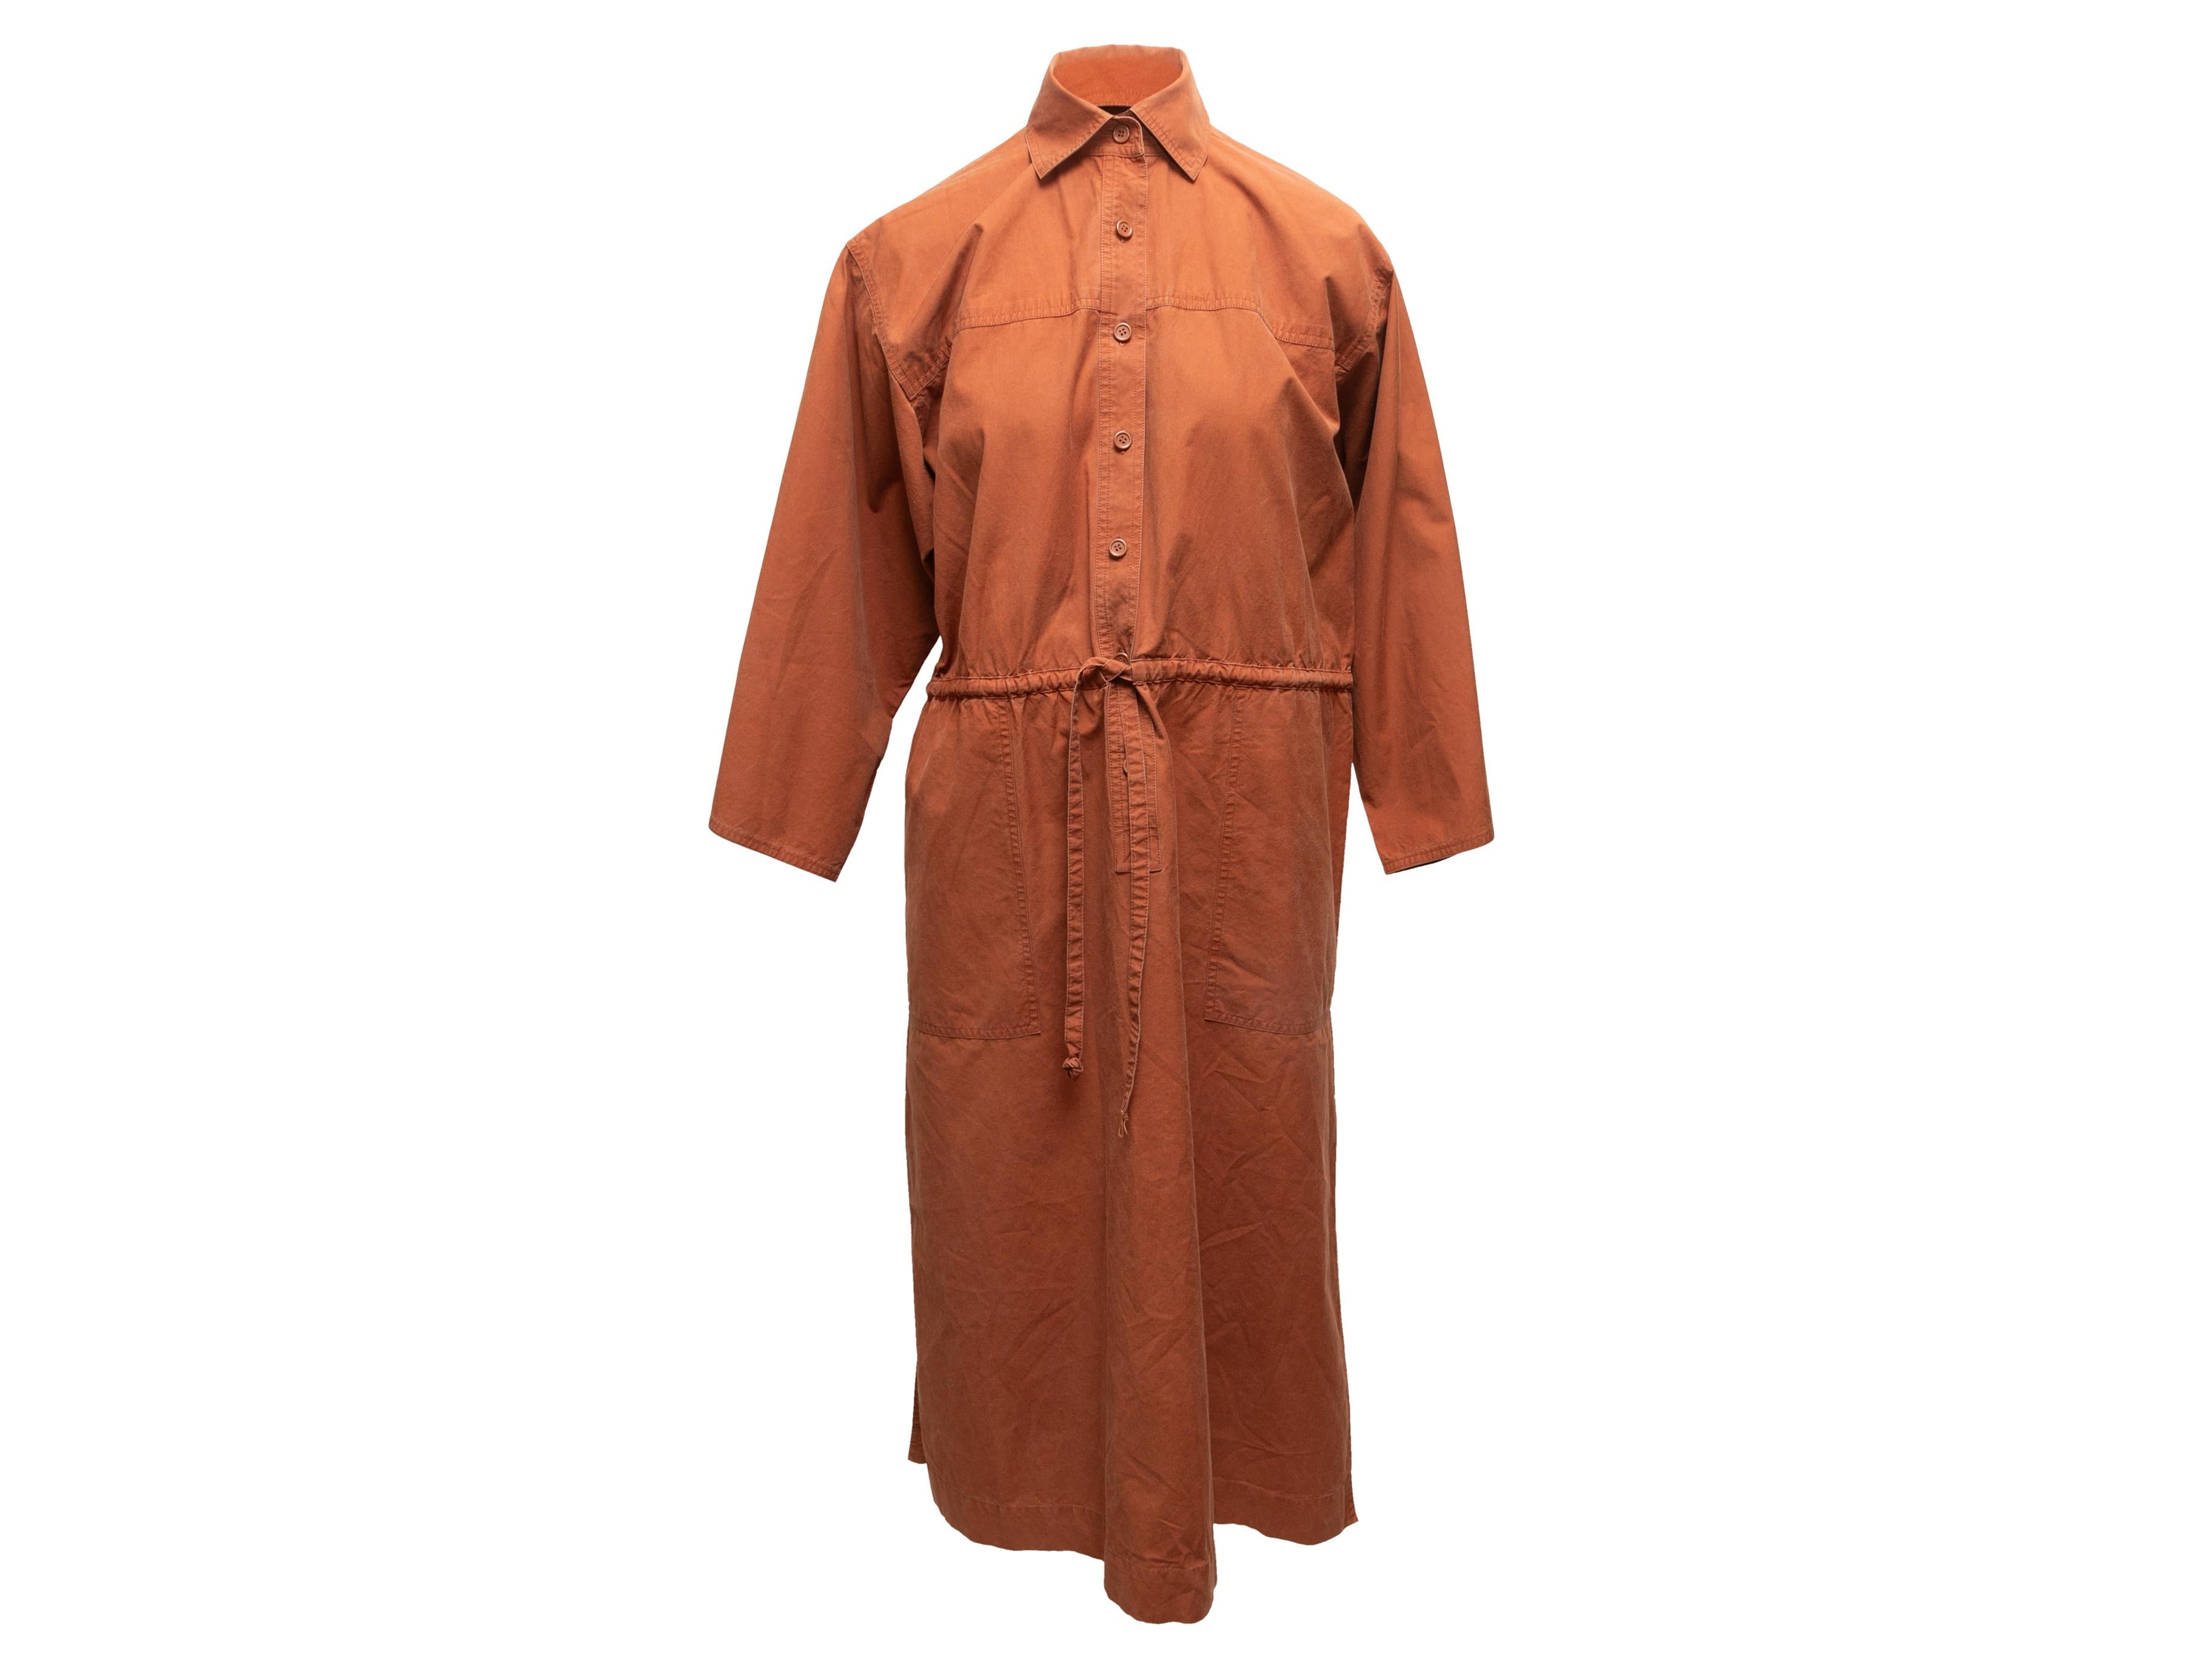 Vintage rust tunic dress by Saint Laurent. Circa 1978. Pointed collar. Long sleeves. Dual hip pockets. Drawstring at waist. Button closures at front. 40